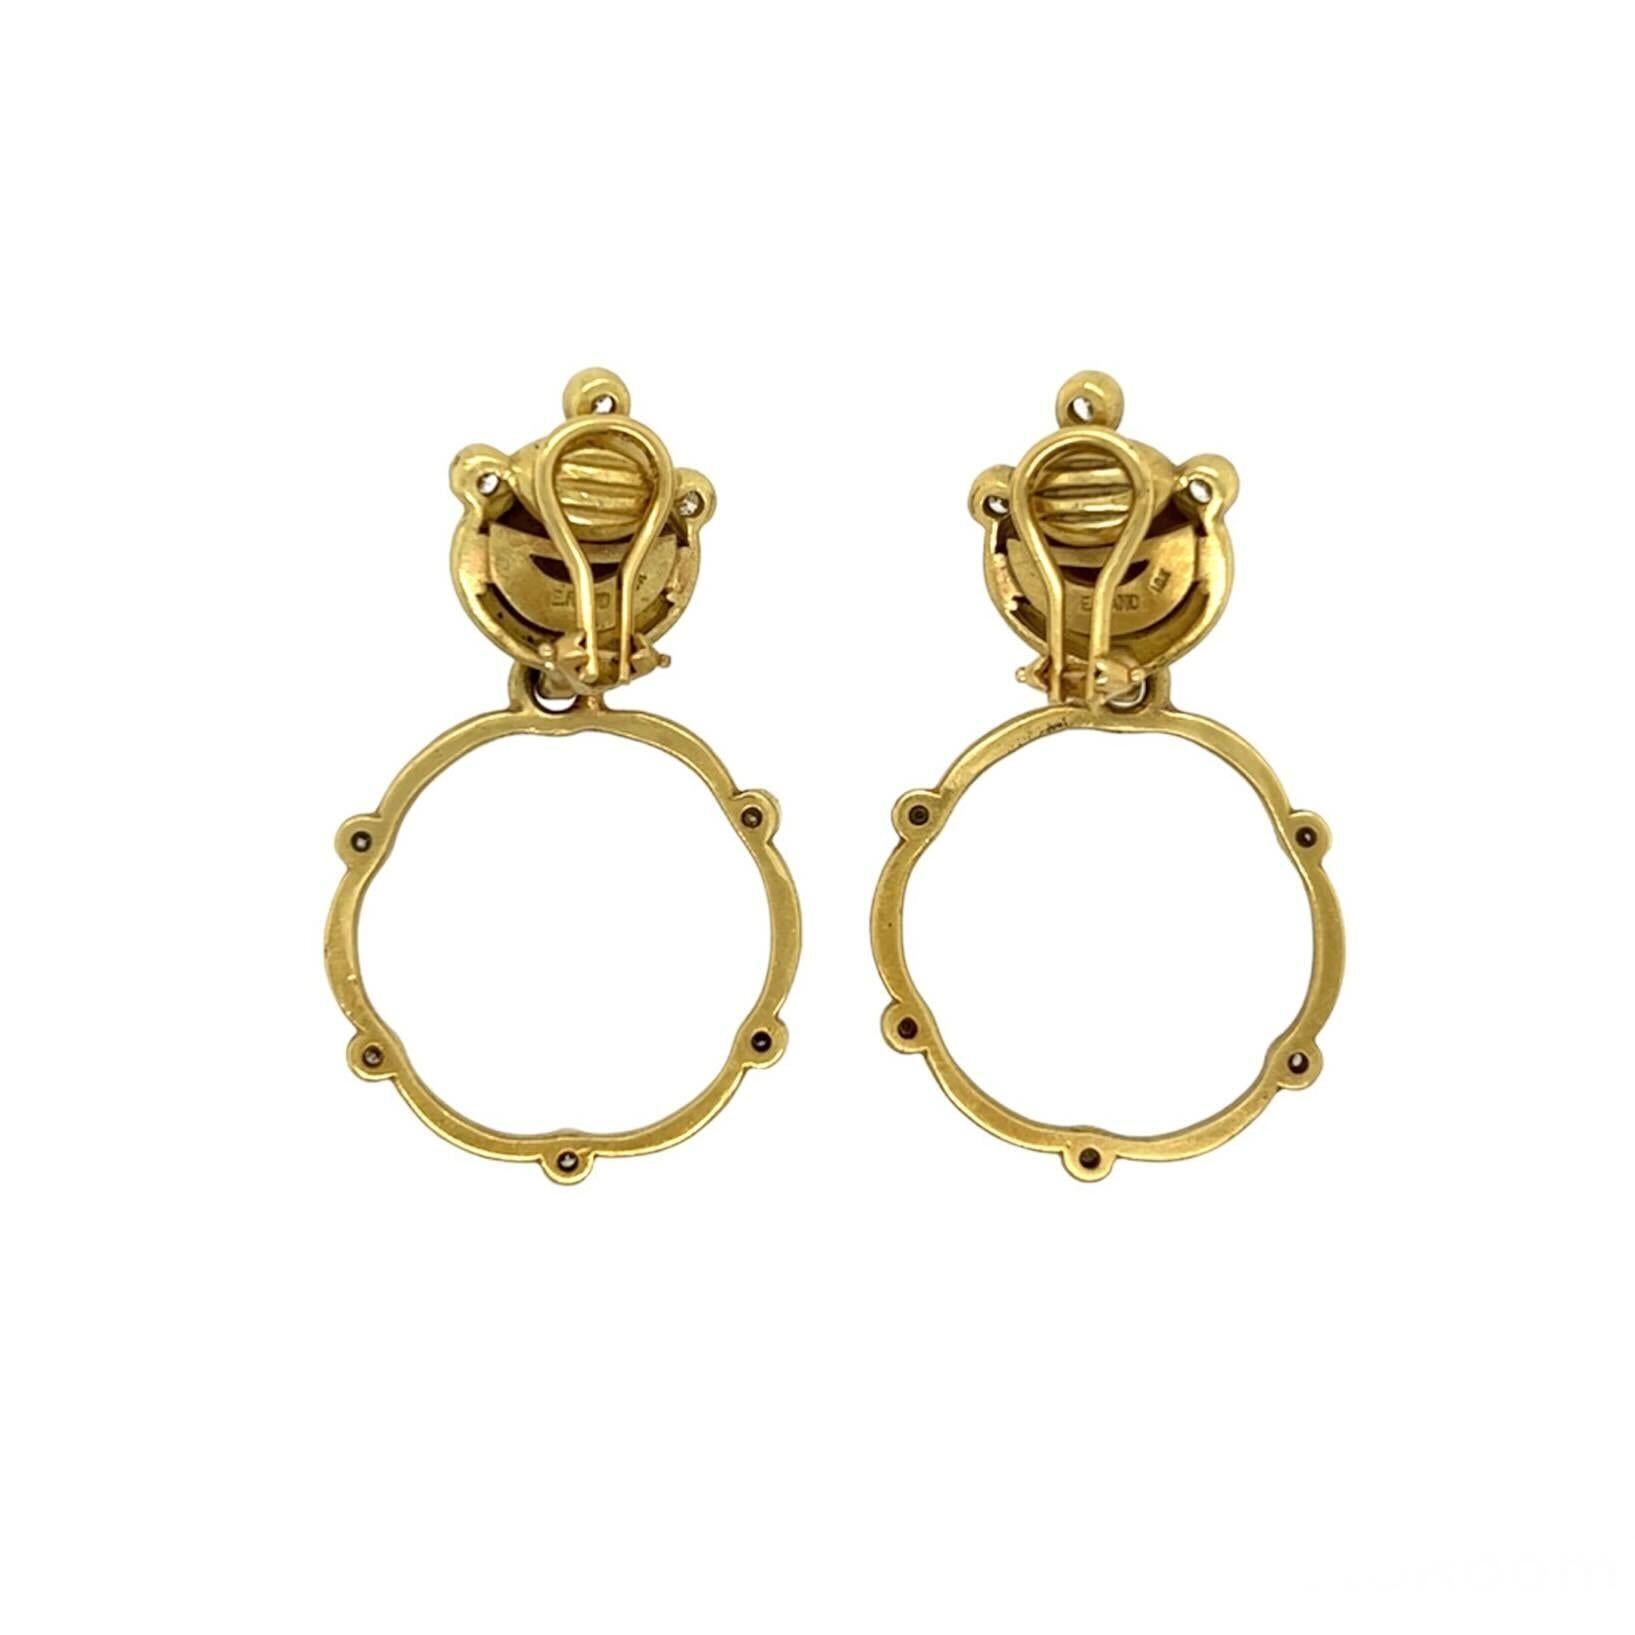 A pair of 18 karat yellow gold and diamond earclips, Elizabeth Rand.  Each earclip designed as a matte yellow gold dome set with three (3) brilliant cut diamonds suspending a scallop edged hoop set with five (5) brilliant cut diamonds.  Total